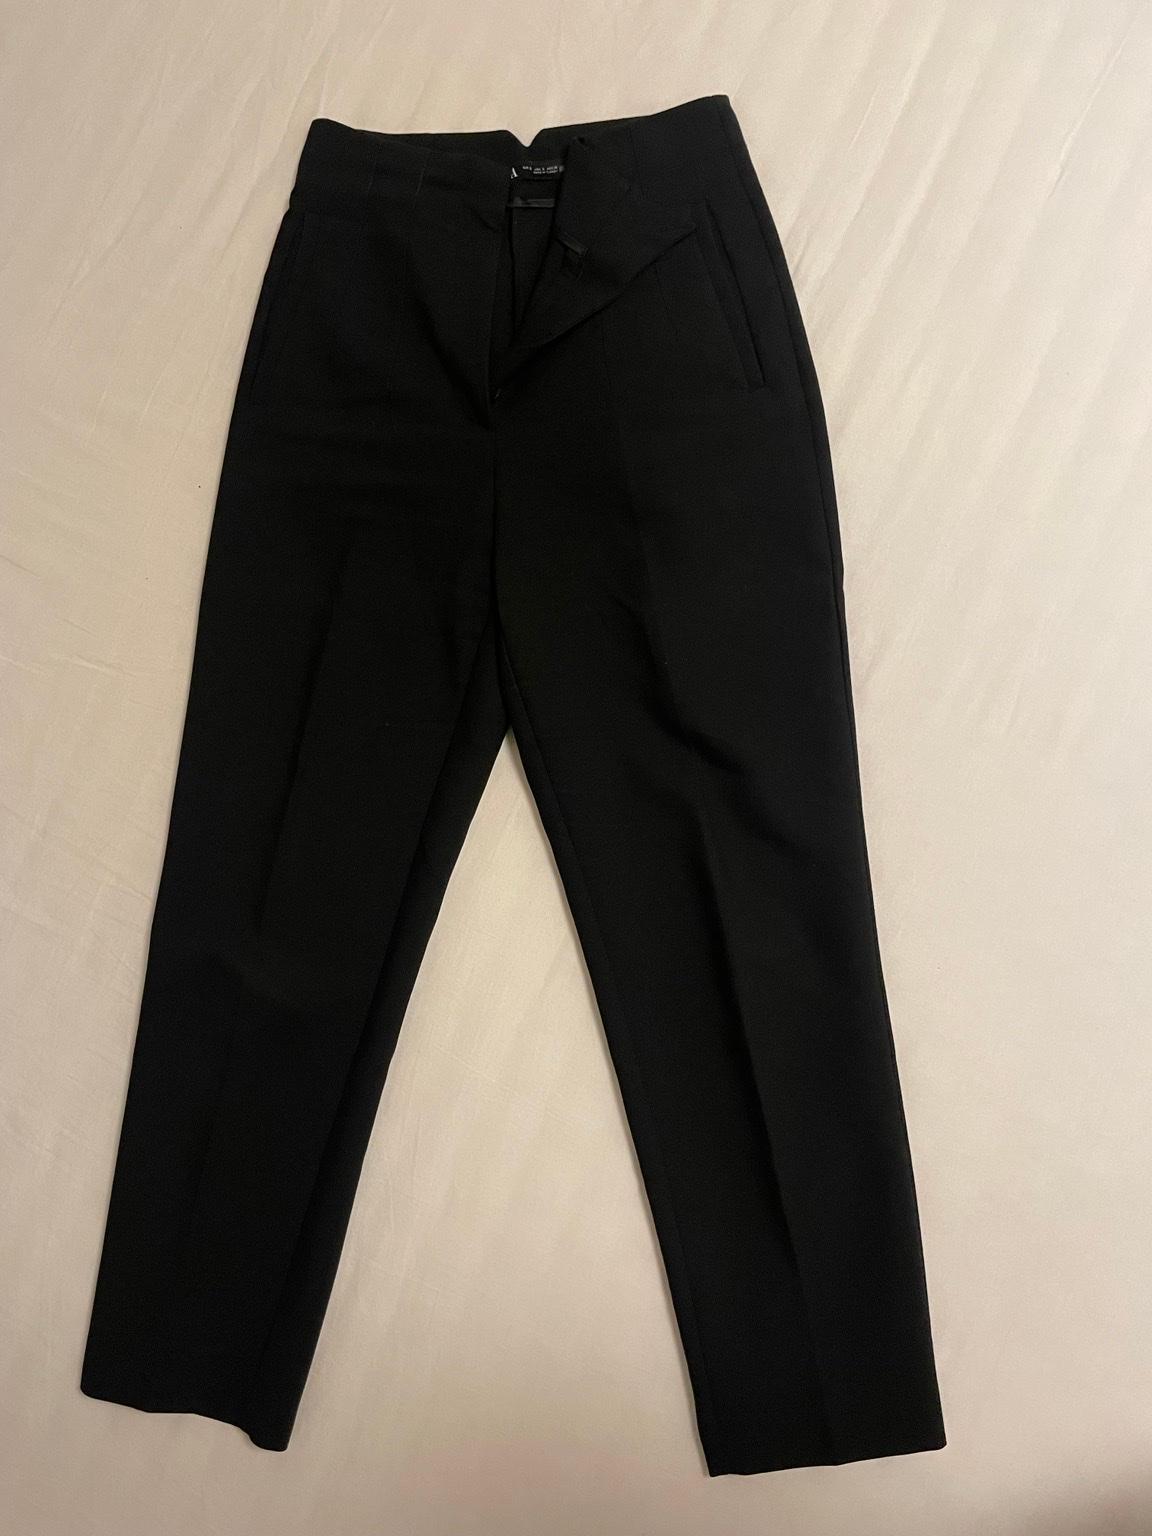 Zara Stoffhose in 6921 Gemeinde Kennelbach for €10.00 for sale | Shpock